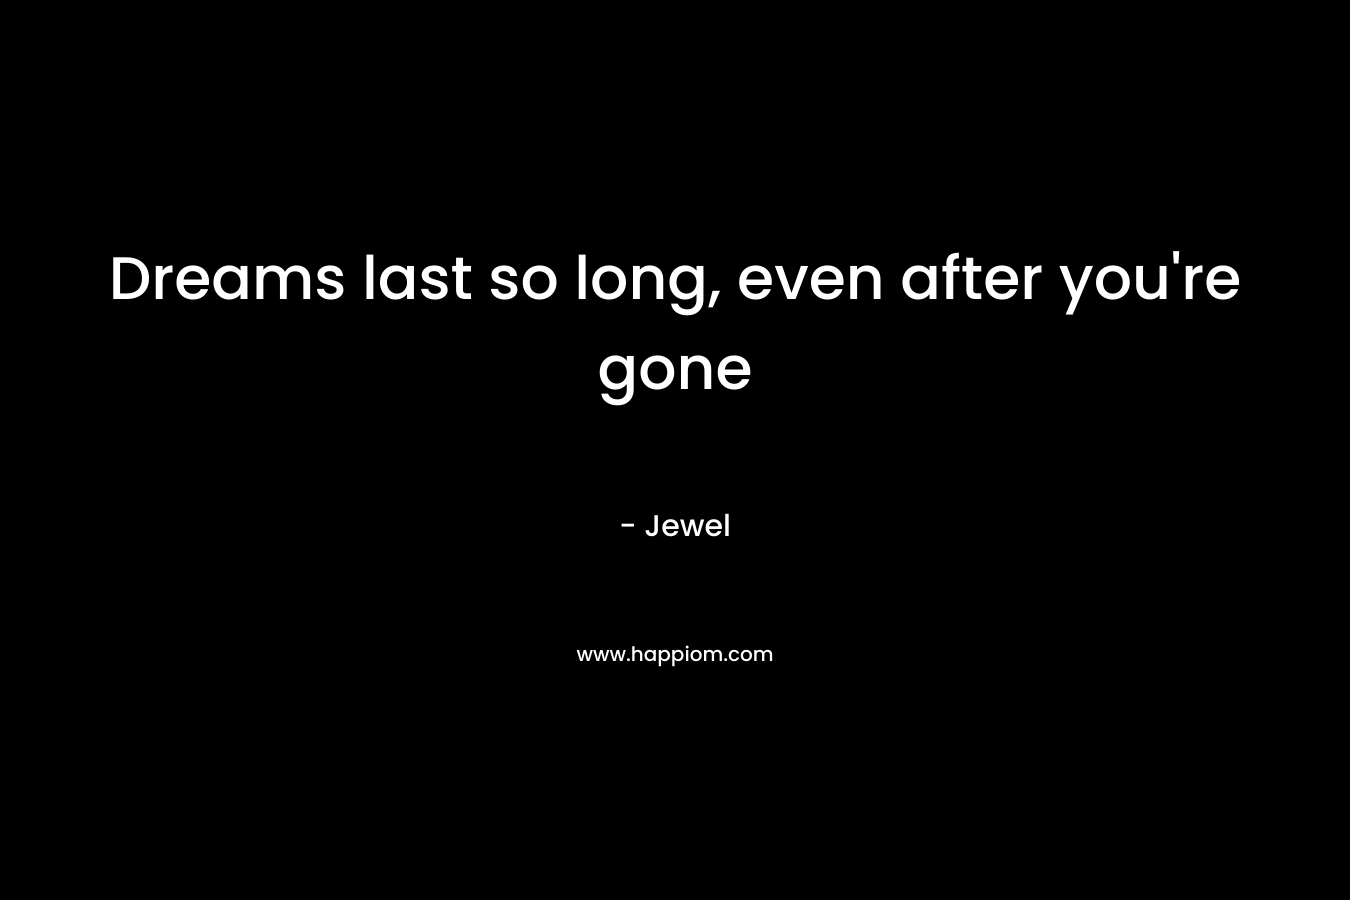 Dreams last so long, even after you’re gone – Jewel